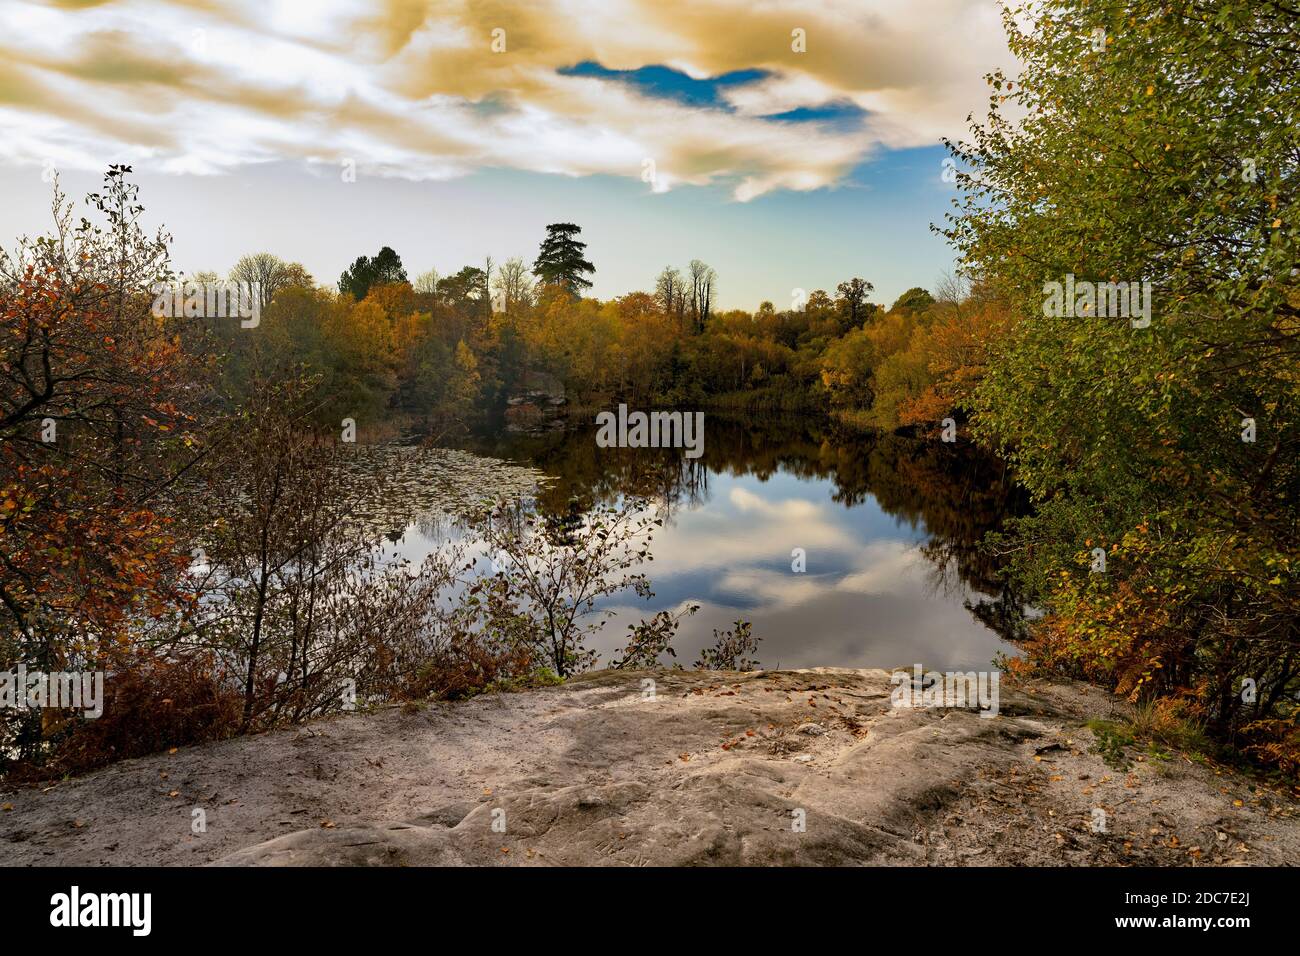 Autunno a Lake Wood, Uckfiled, East Sussex, Inghilterra, Regno Unito. Foto Stock